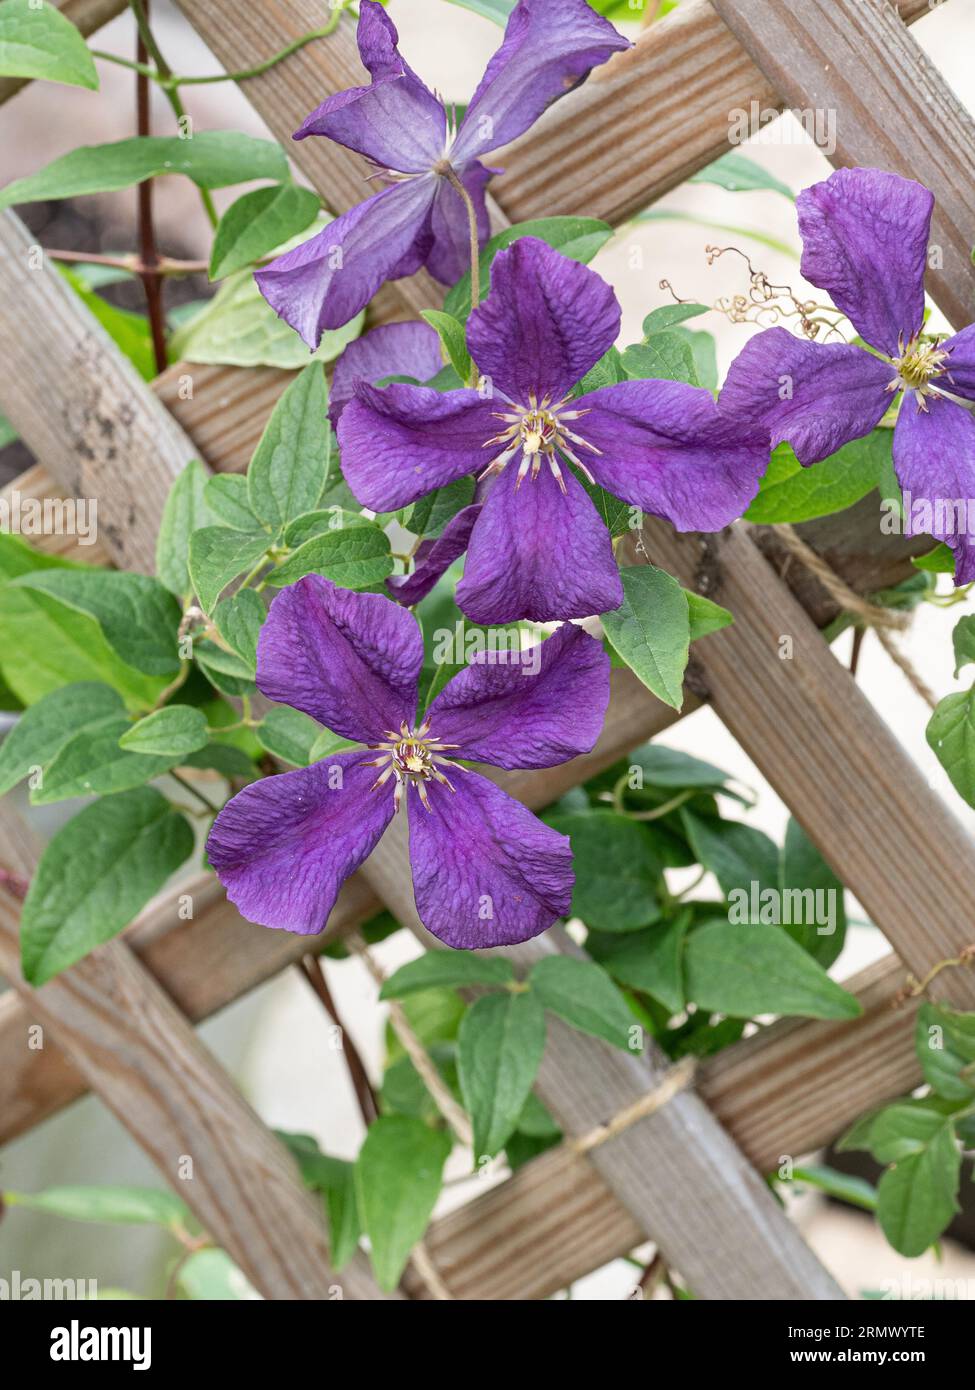 A group of the blue mauve flowers of the scrambling Clematis 'Arabella' growing on a trellis. Stock Photo